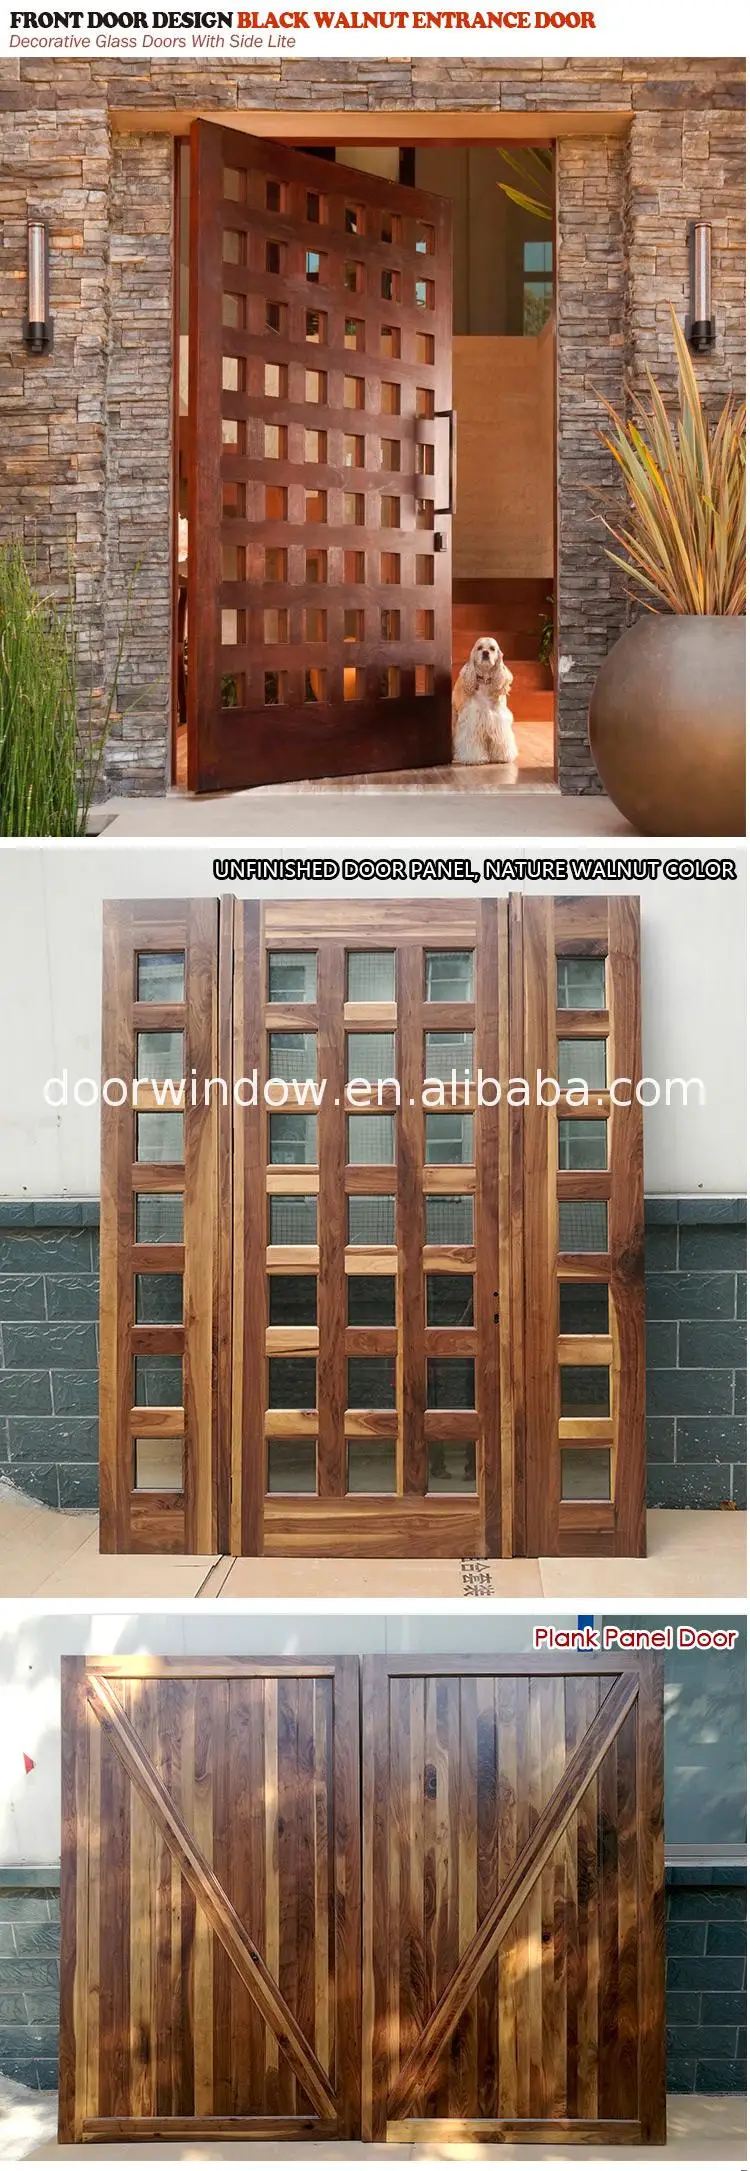 Best selling items wooden door paint materials manufacturers in china